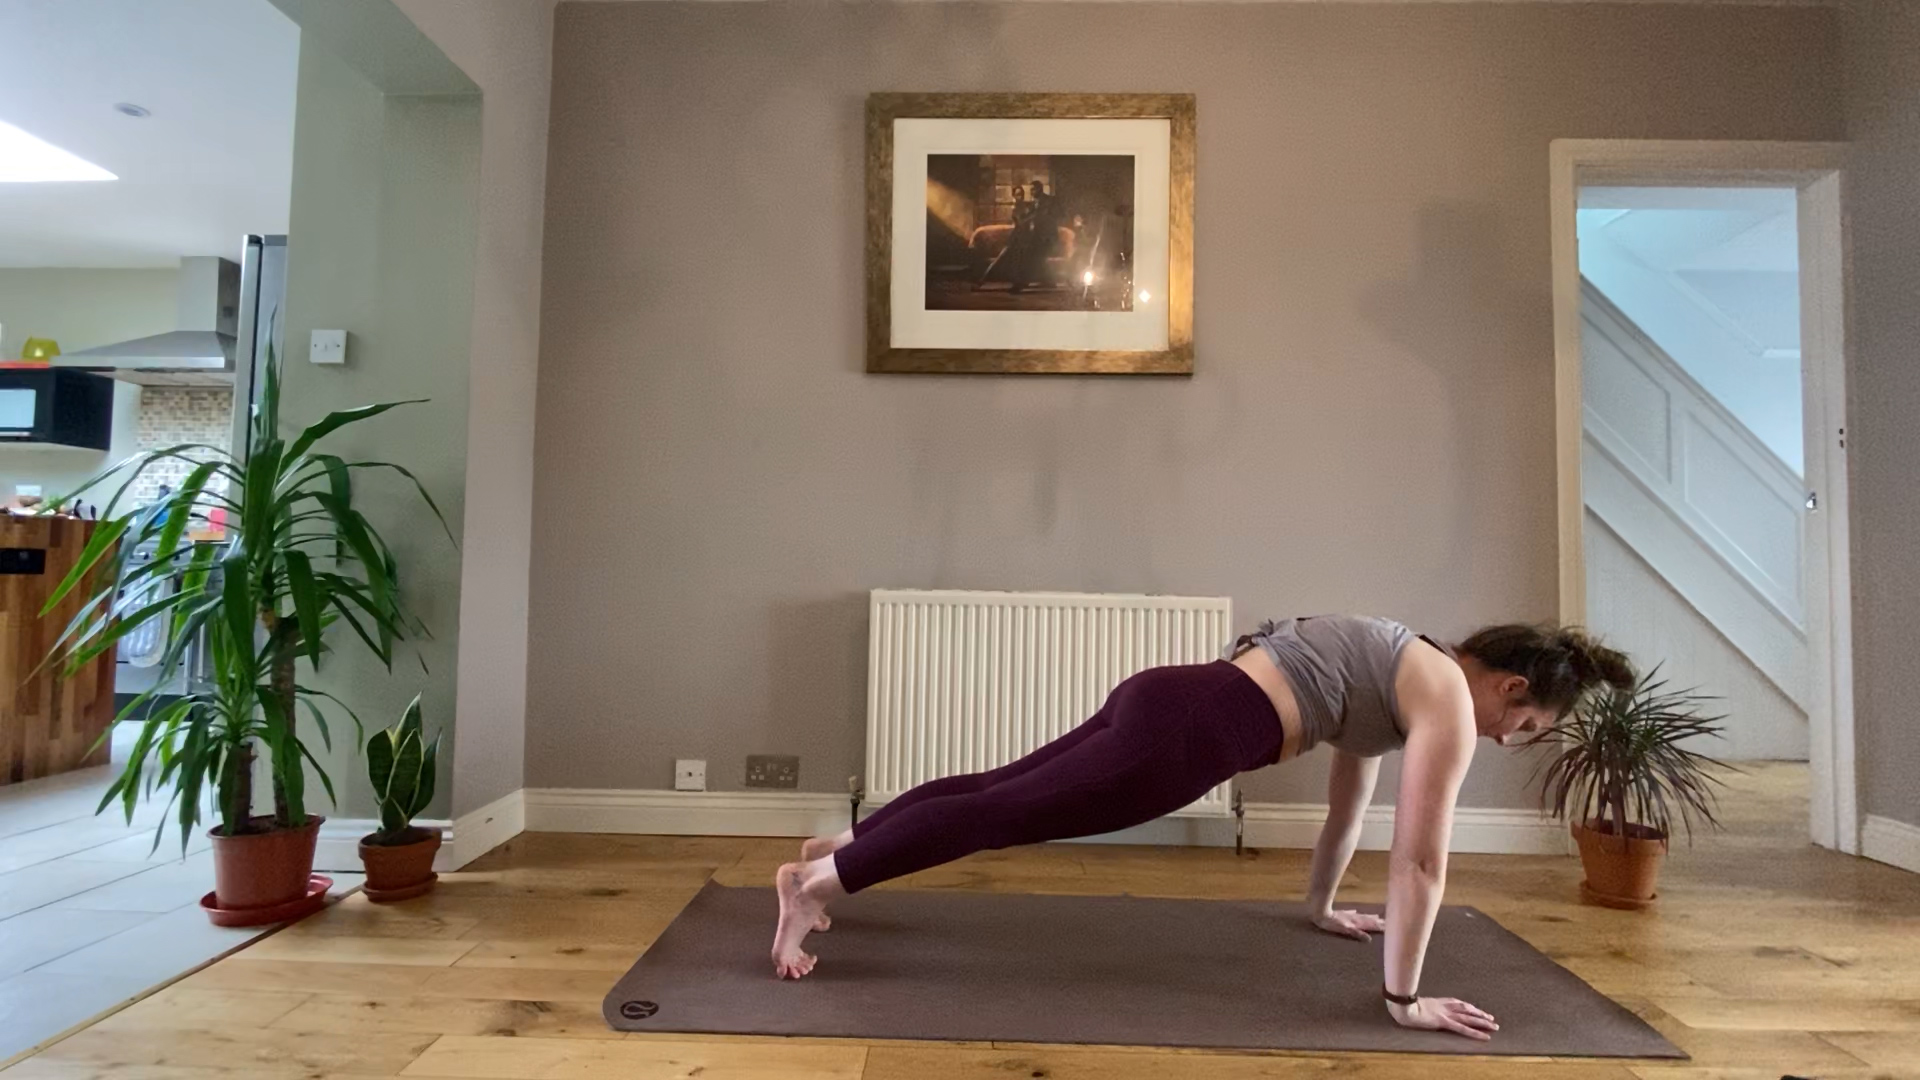 7 Yoga Pose For Lower Back Pain Relief - Restorative Strength